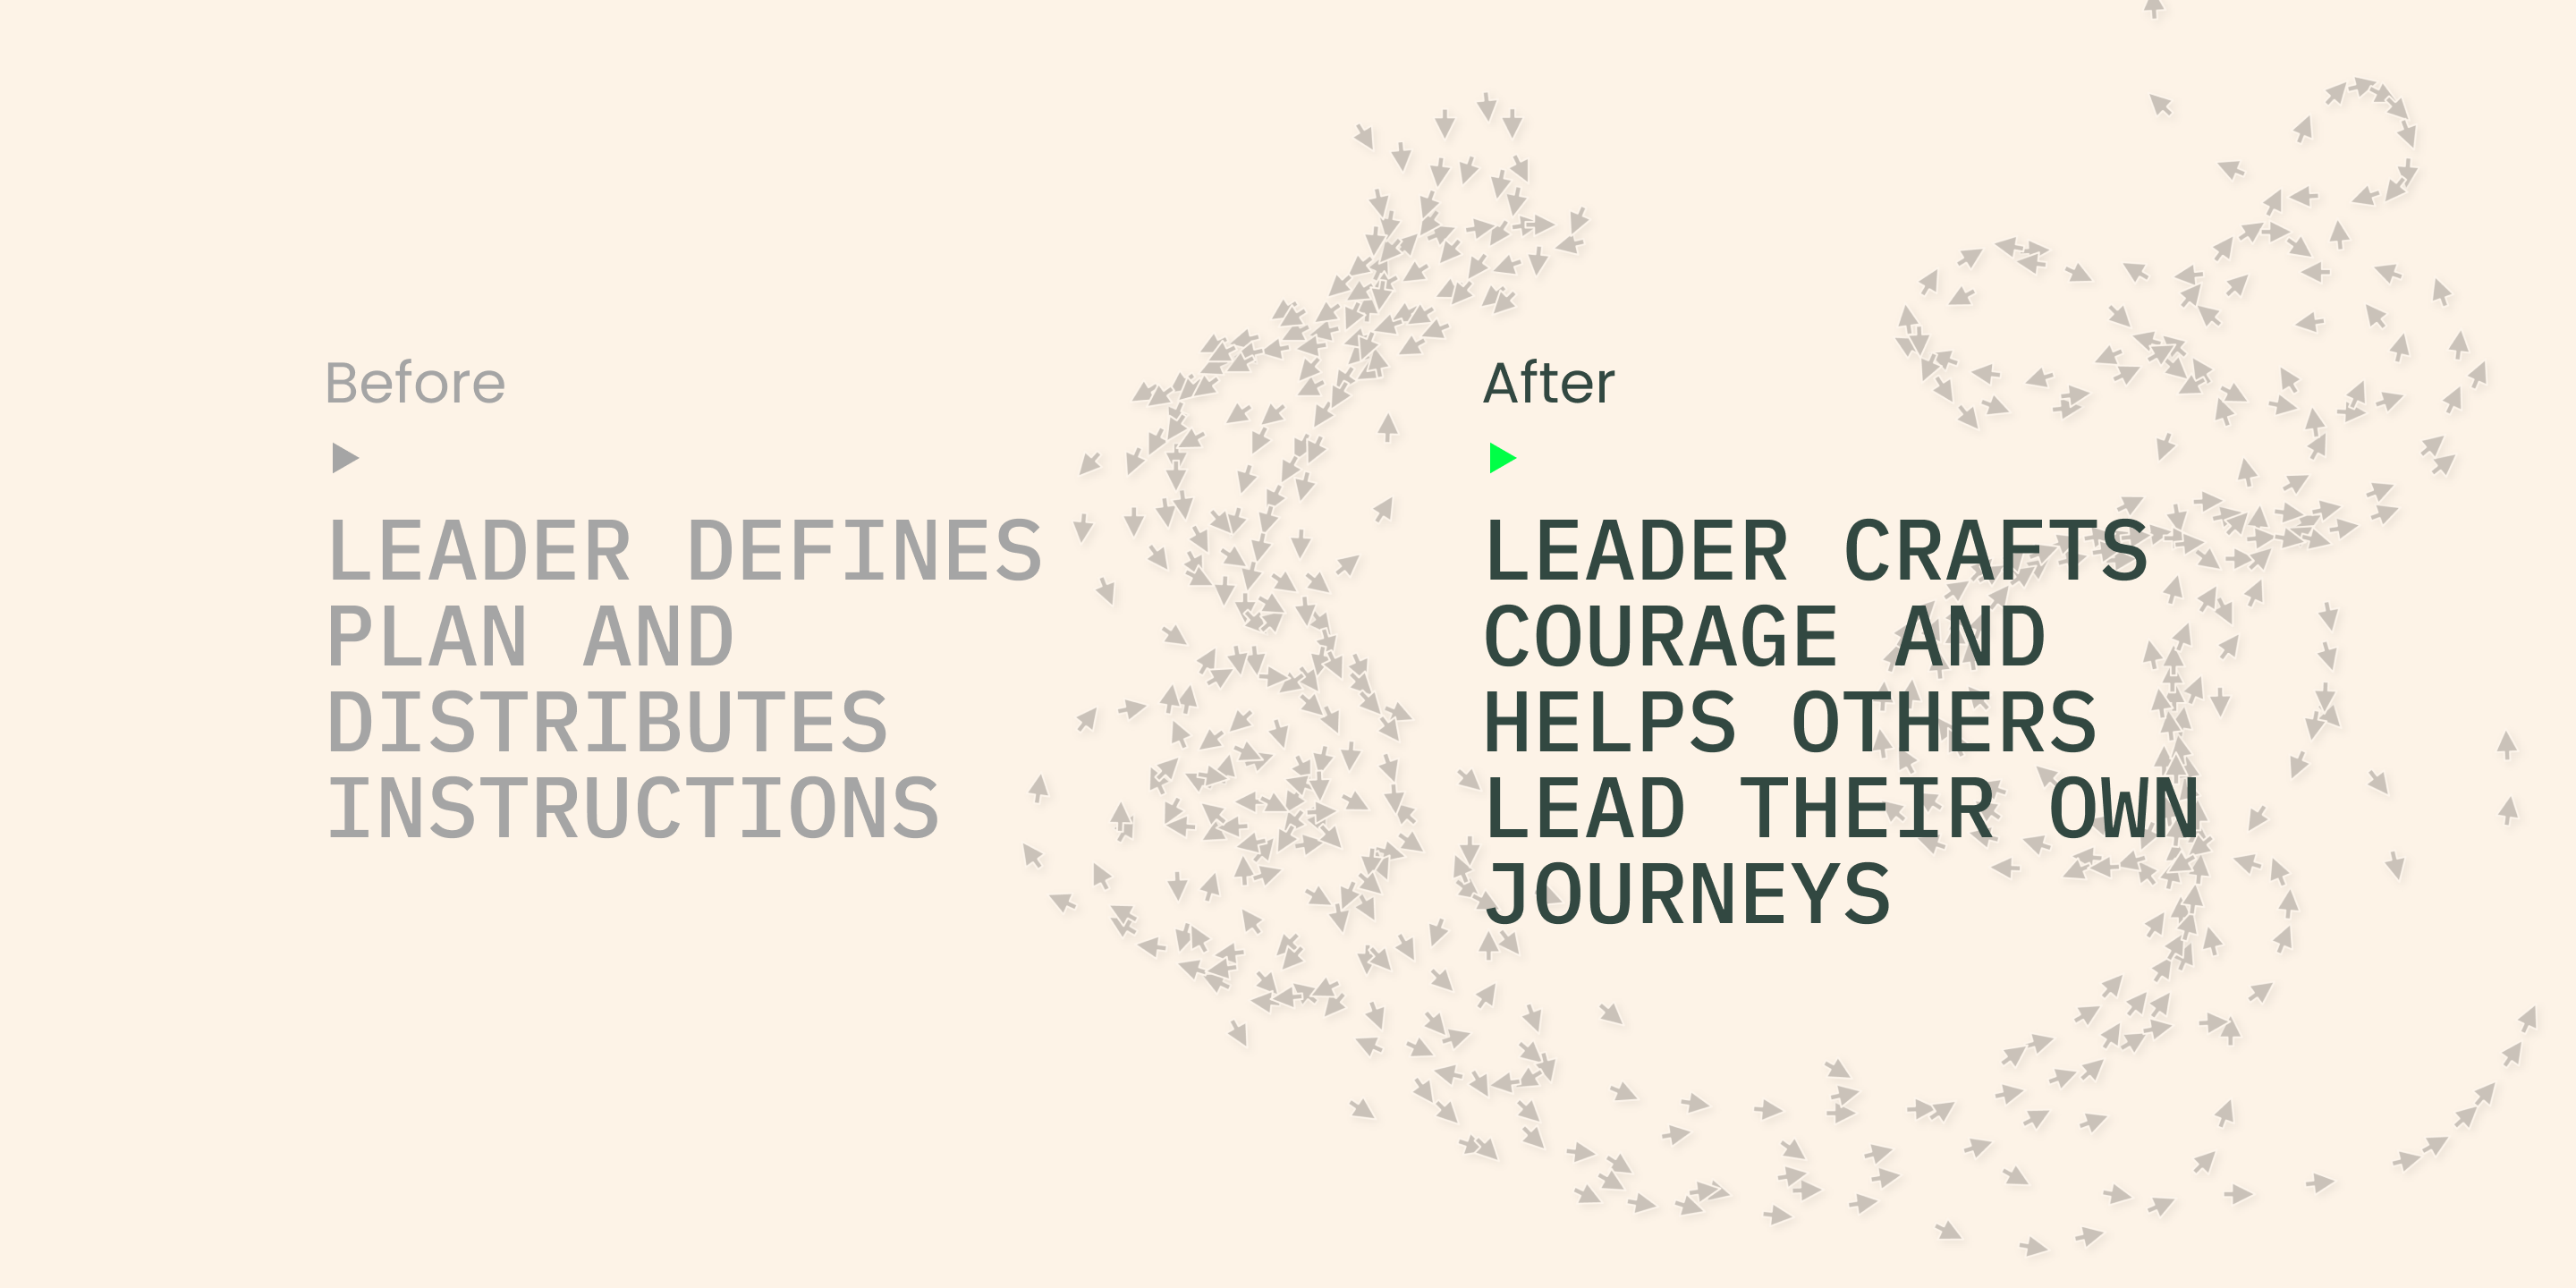 DAO leaders craft courage, which helps others lead their own journeys